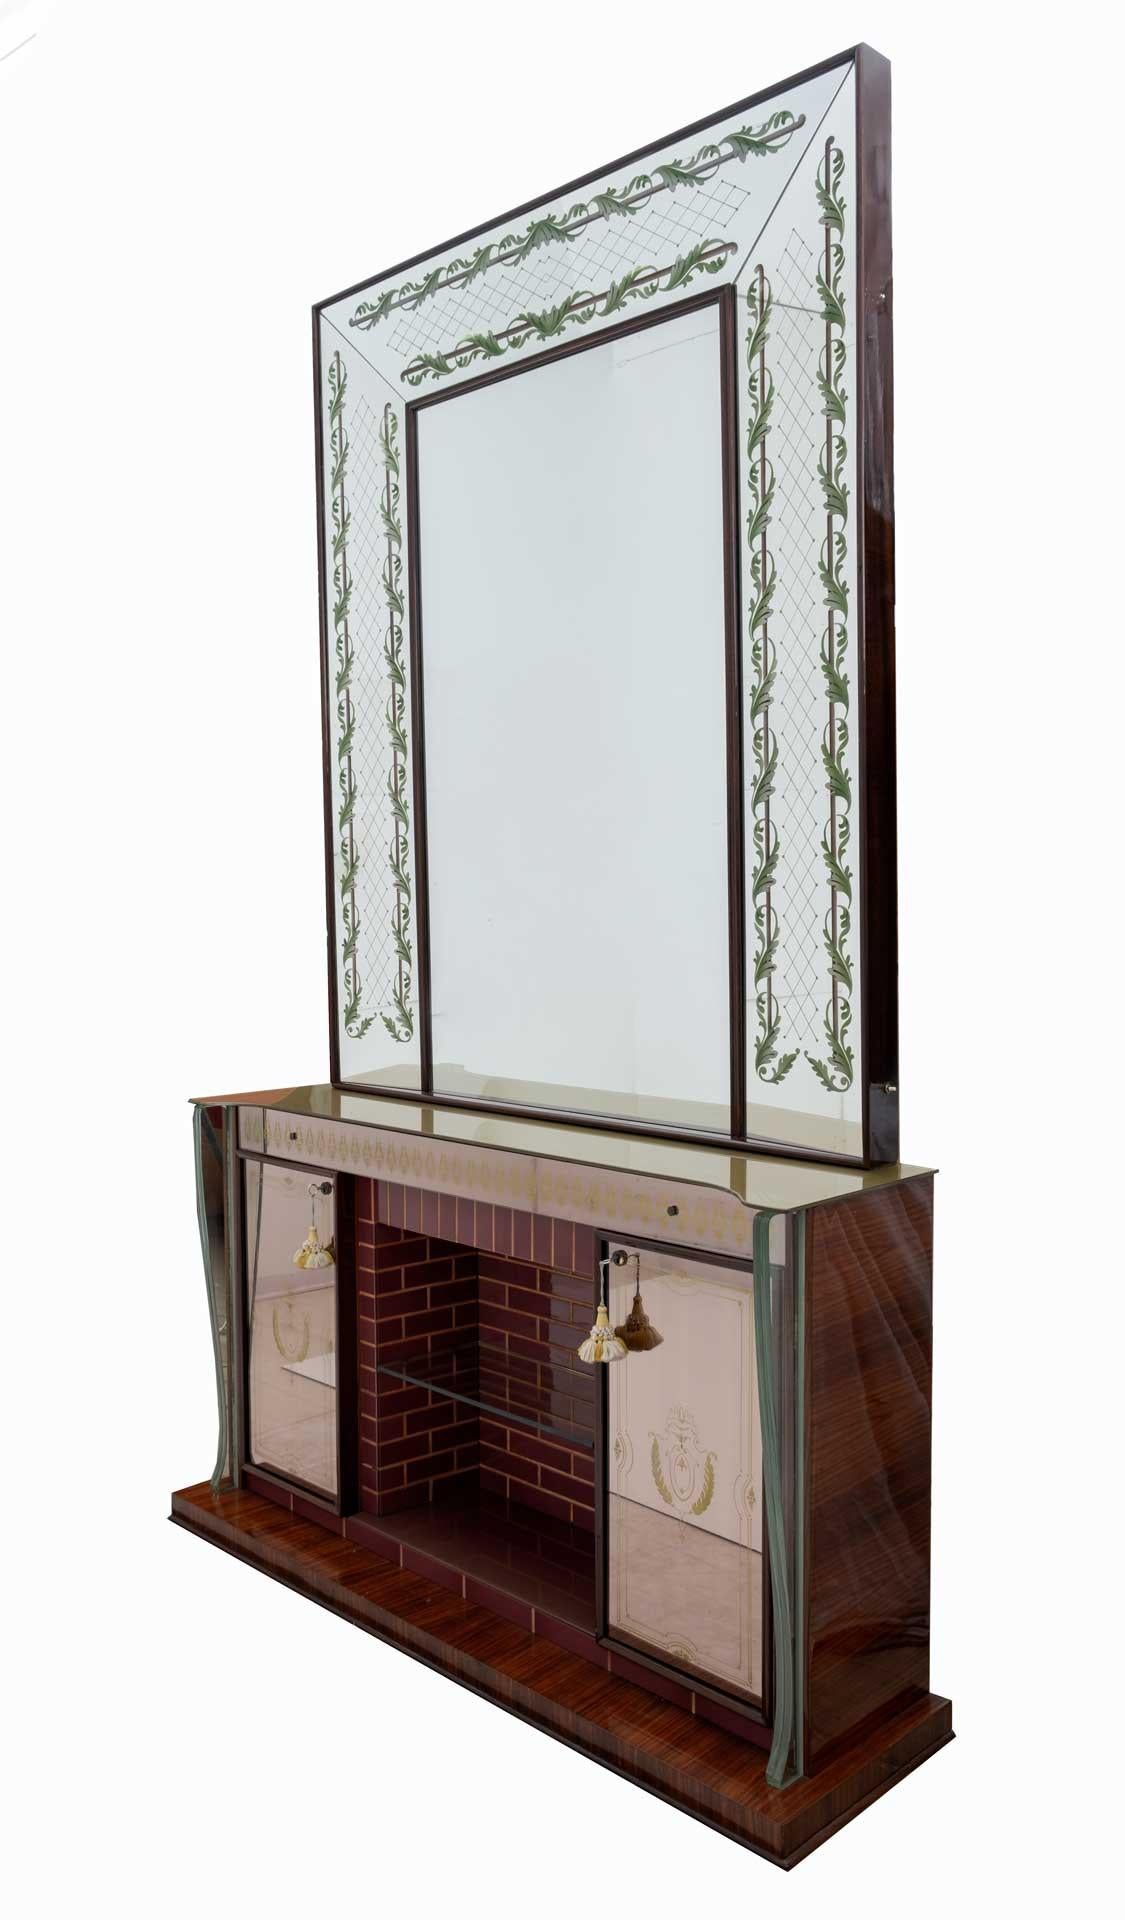 Spectacular and rare bar cabinet or sideboard with mirror. Designed in Italy by Luigi Brusotti in the 1940s. The front is entirely covered with precious Murano glass. The tiles are divided separated by maple wood slats. The doors have built-in